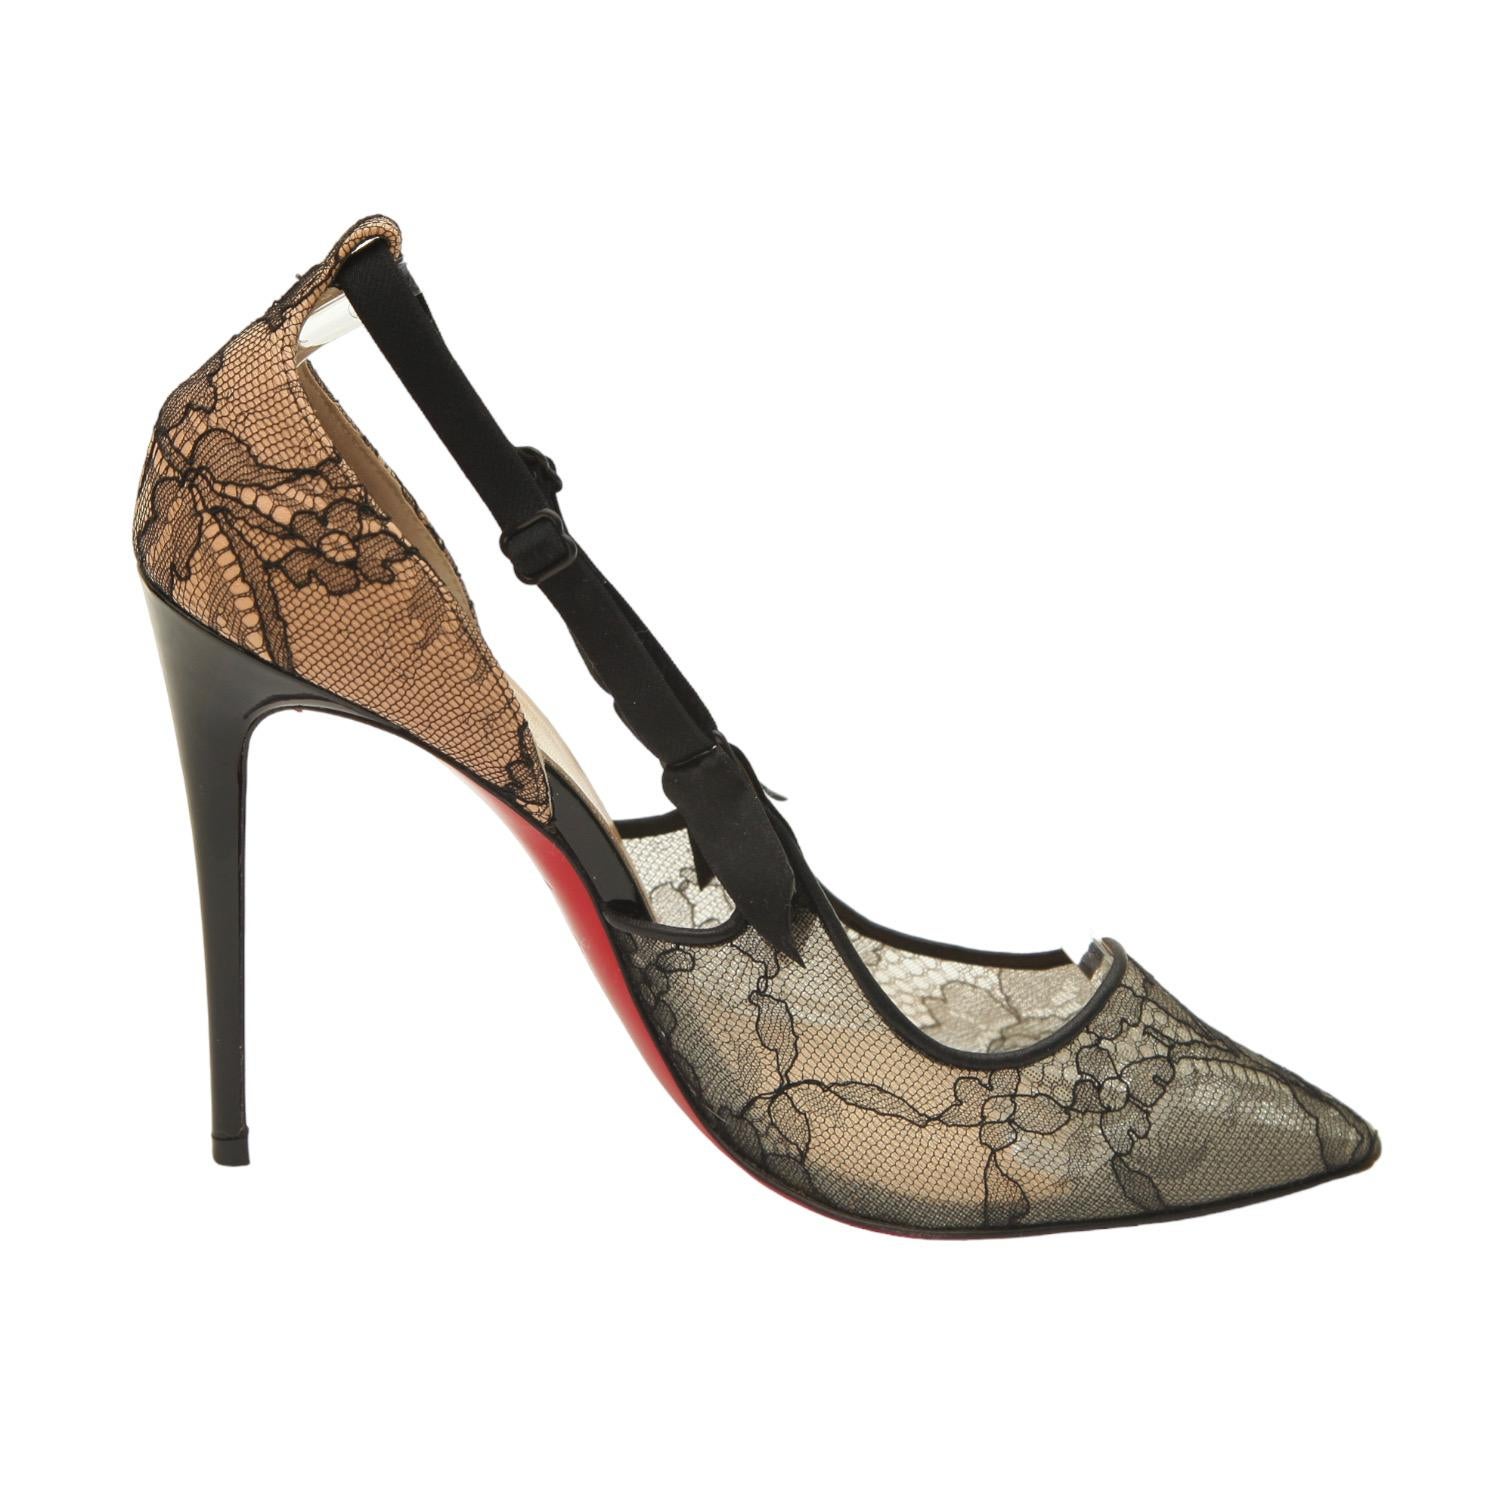 Christian Louboutin Black Satin Lace HOT JEANBI 100 PUMPS

Details:
- Black satin/lace uppers.
- Pointed toe.
- Bow at vamp.
- Slip on.
- Comes with dust bag.

Size: 38.5

Measurements (Approx):
- Insole 9.75